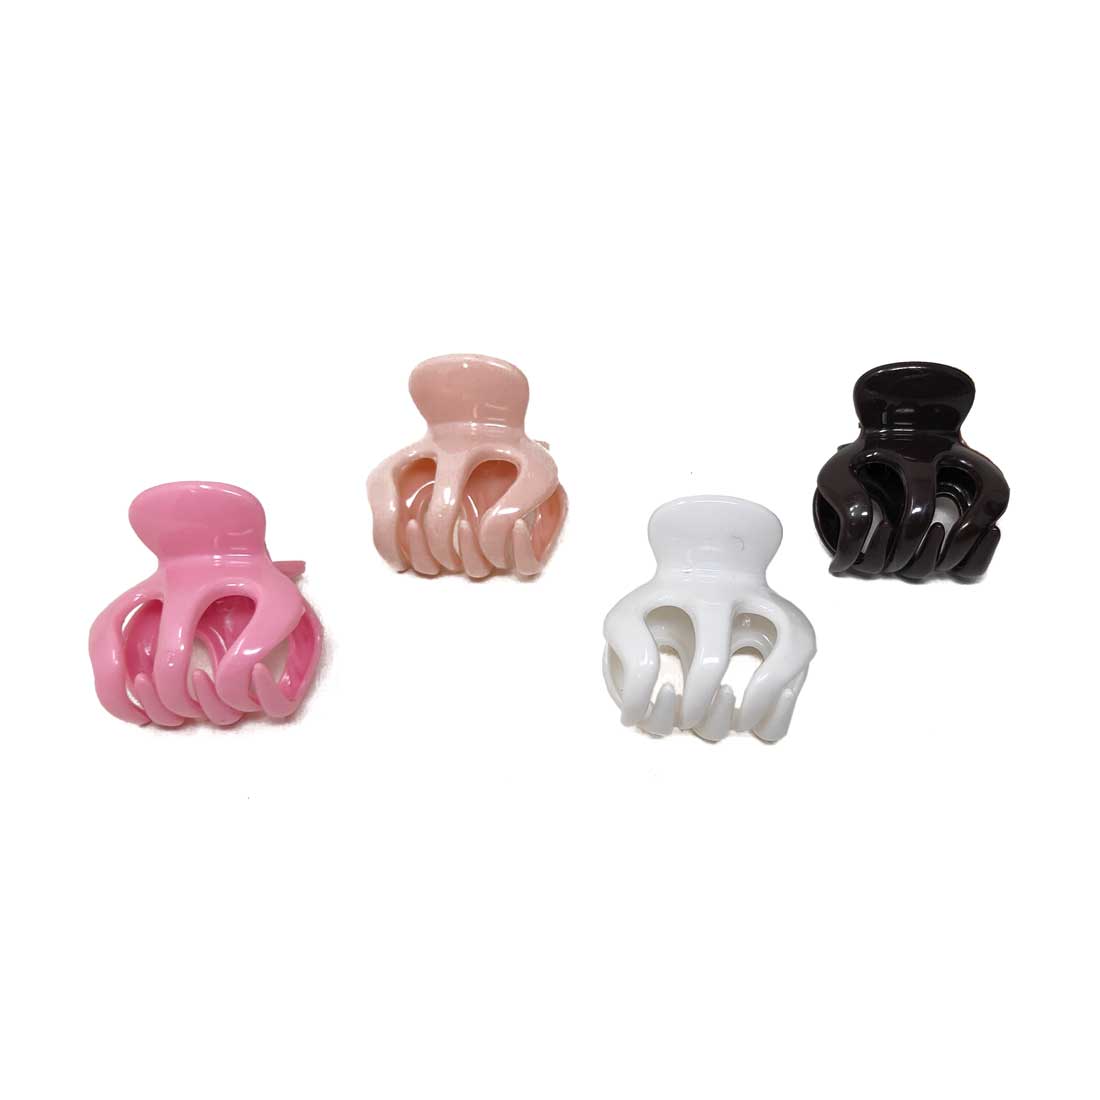 Anokhi Ada Plastic Hair Clutcher / Hair Claw for Girls and Women (Multi-Colour; Pack of 4; 02-10C)